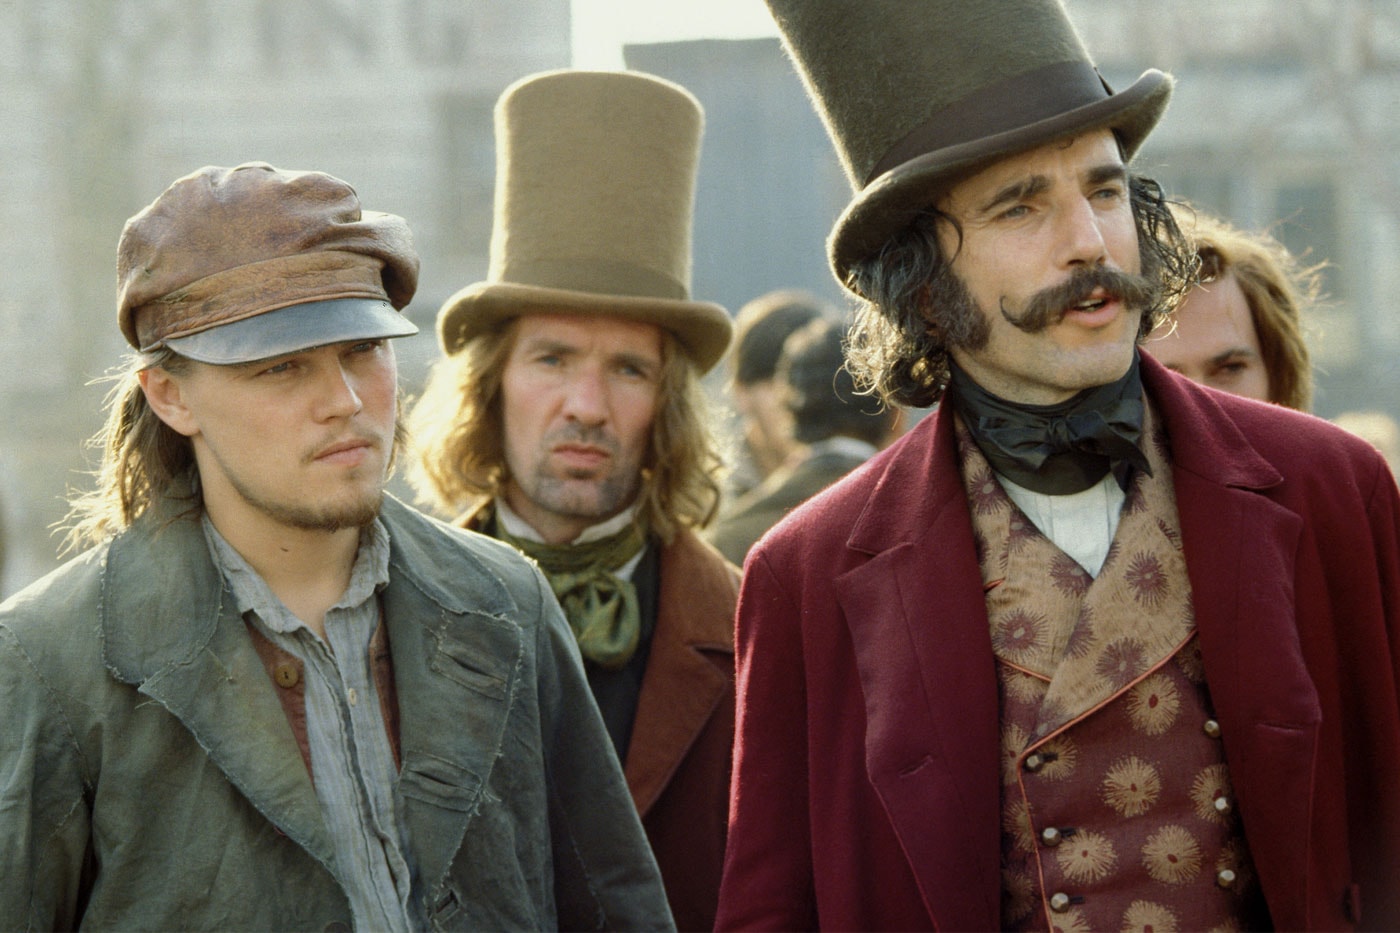 Martin Scorsese to Direct executive produce two episodes Gangs of New York Series Herbert Asbury